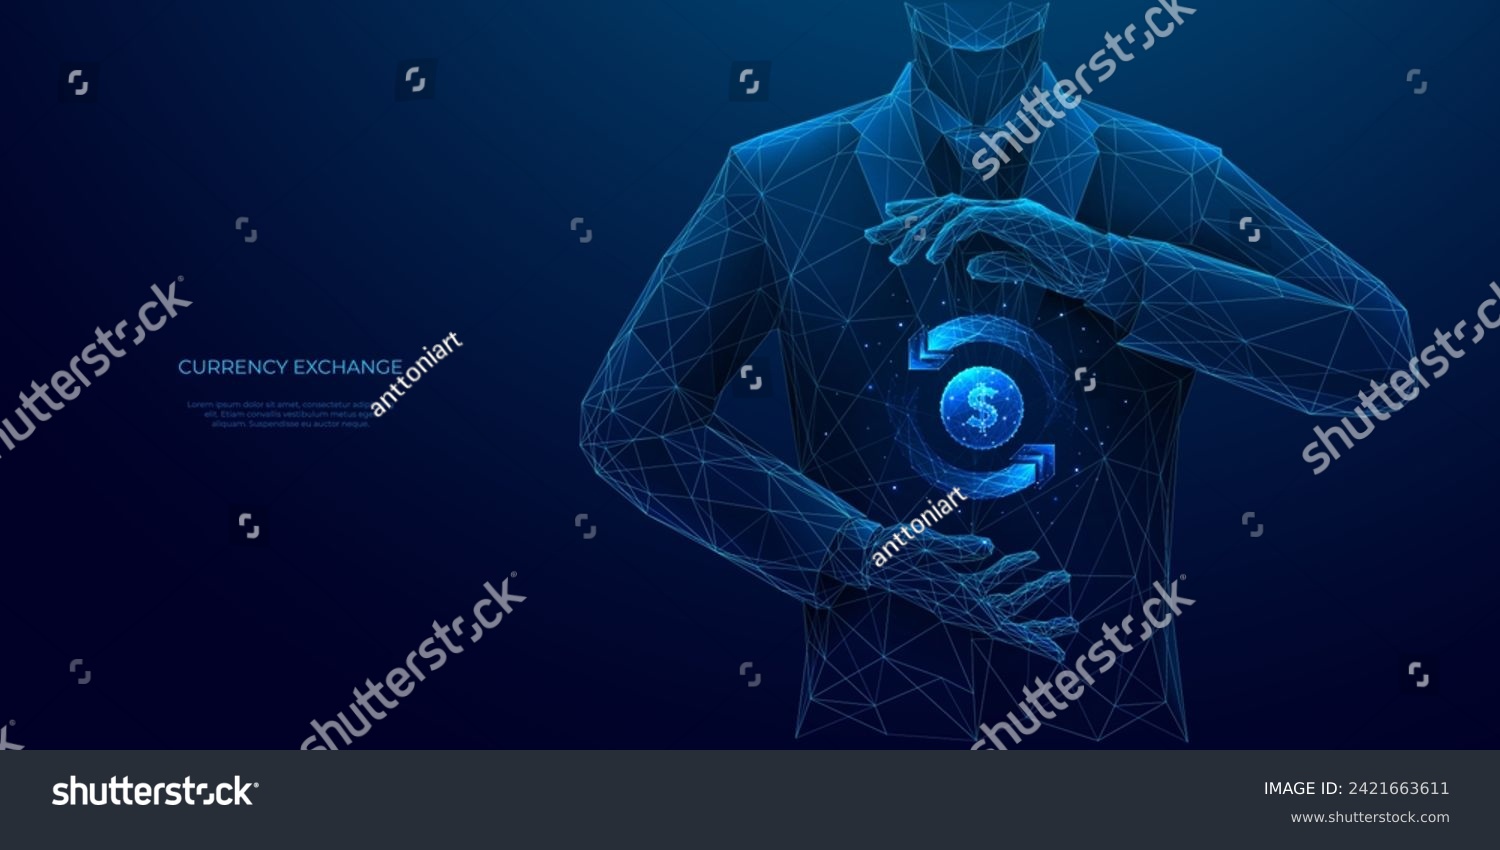 SVG of Abstract businessman holding a Currency Exchange Symbol in his hands on a dark blue background. Digital money transfer. Finance concept. Dollar coin and rotate double arrows. Vector illustration. svg